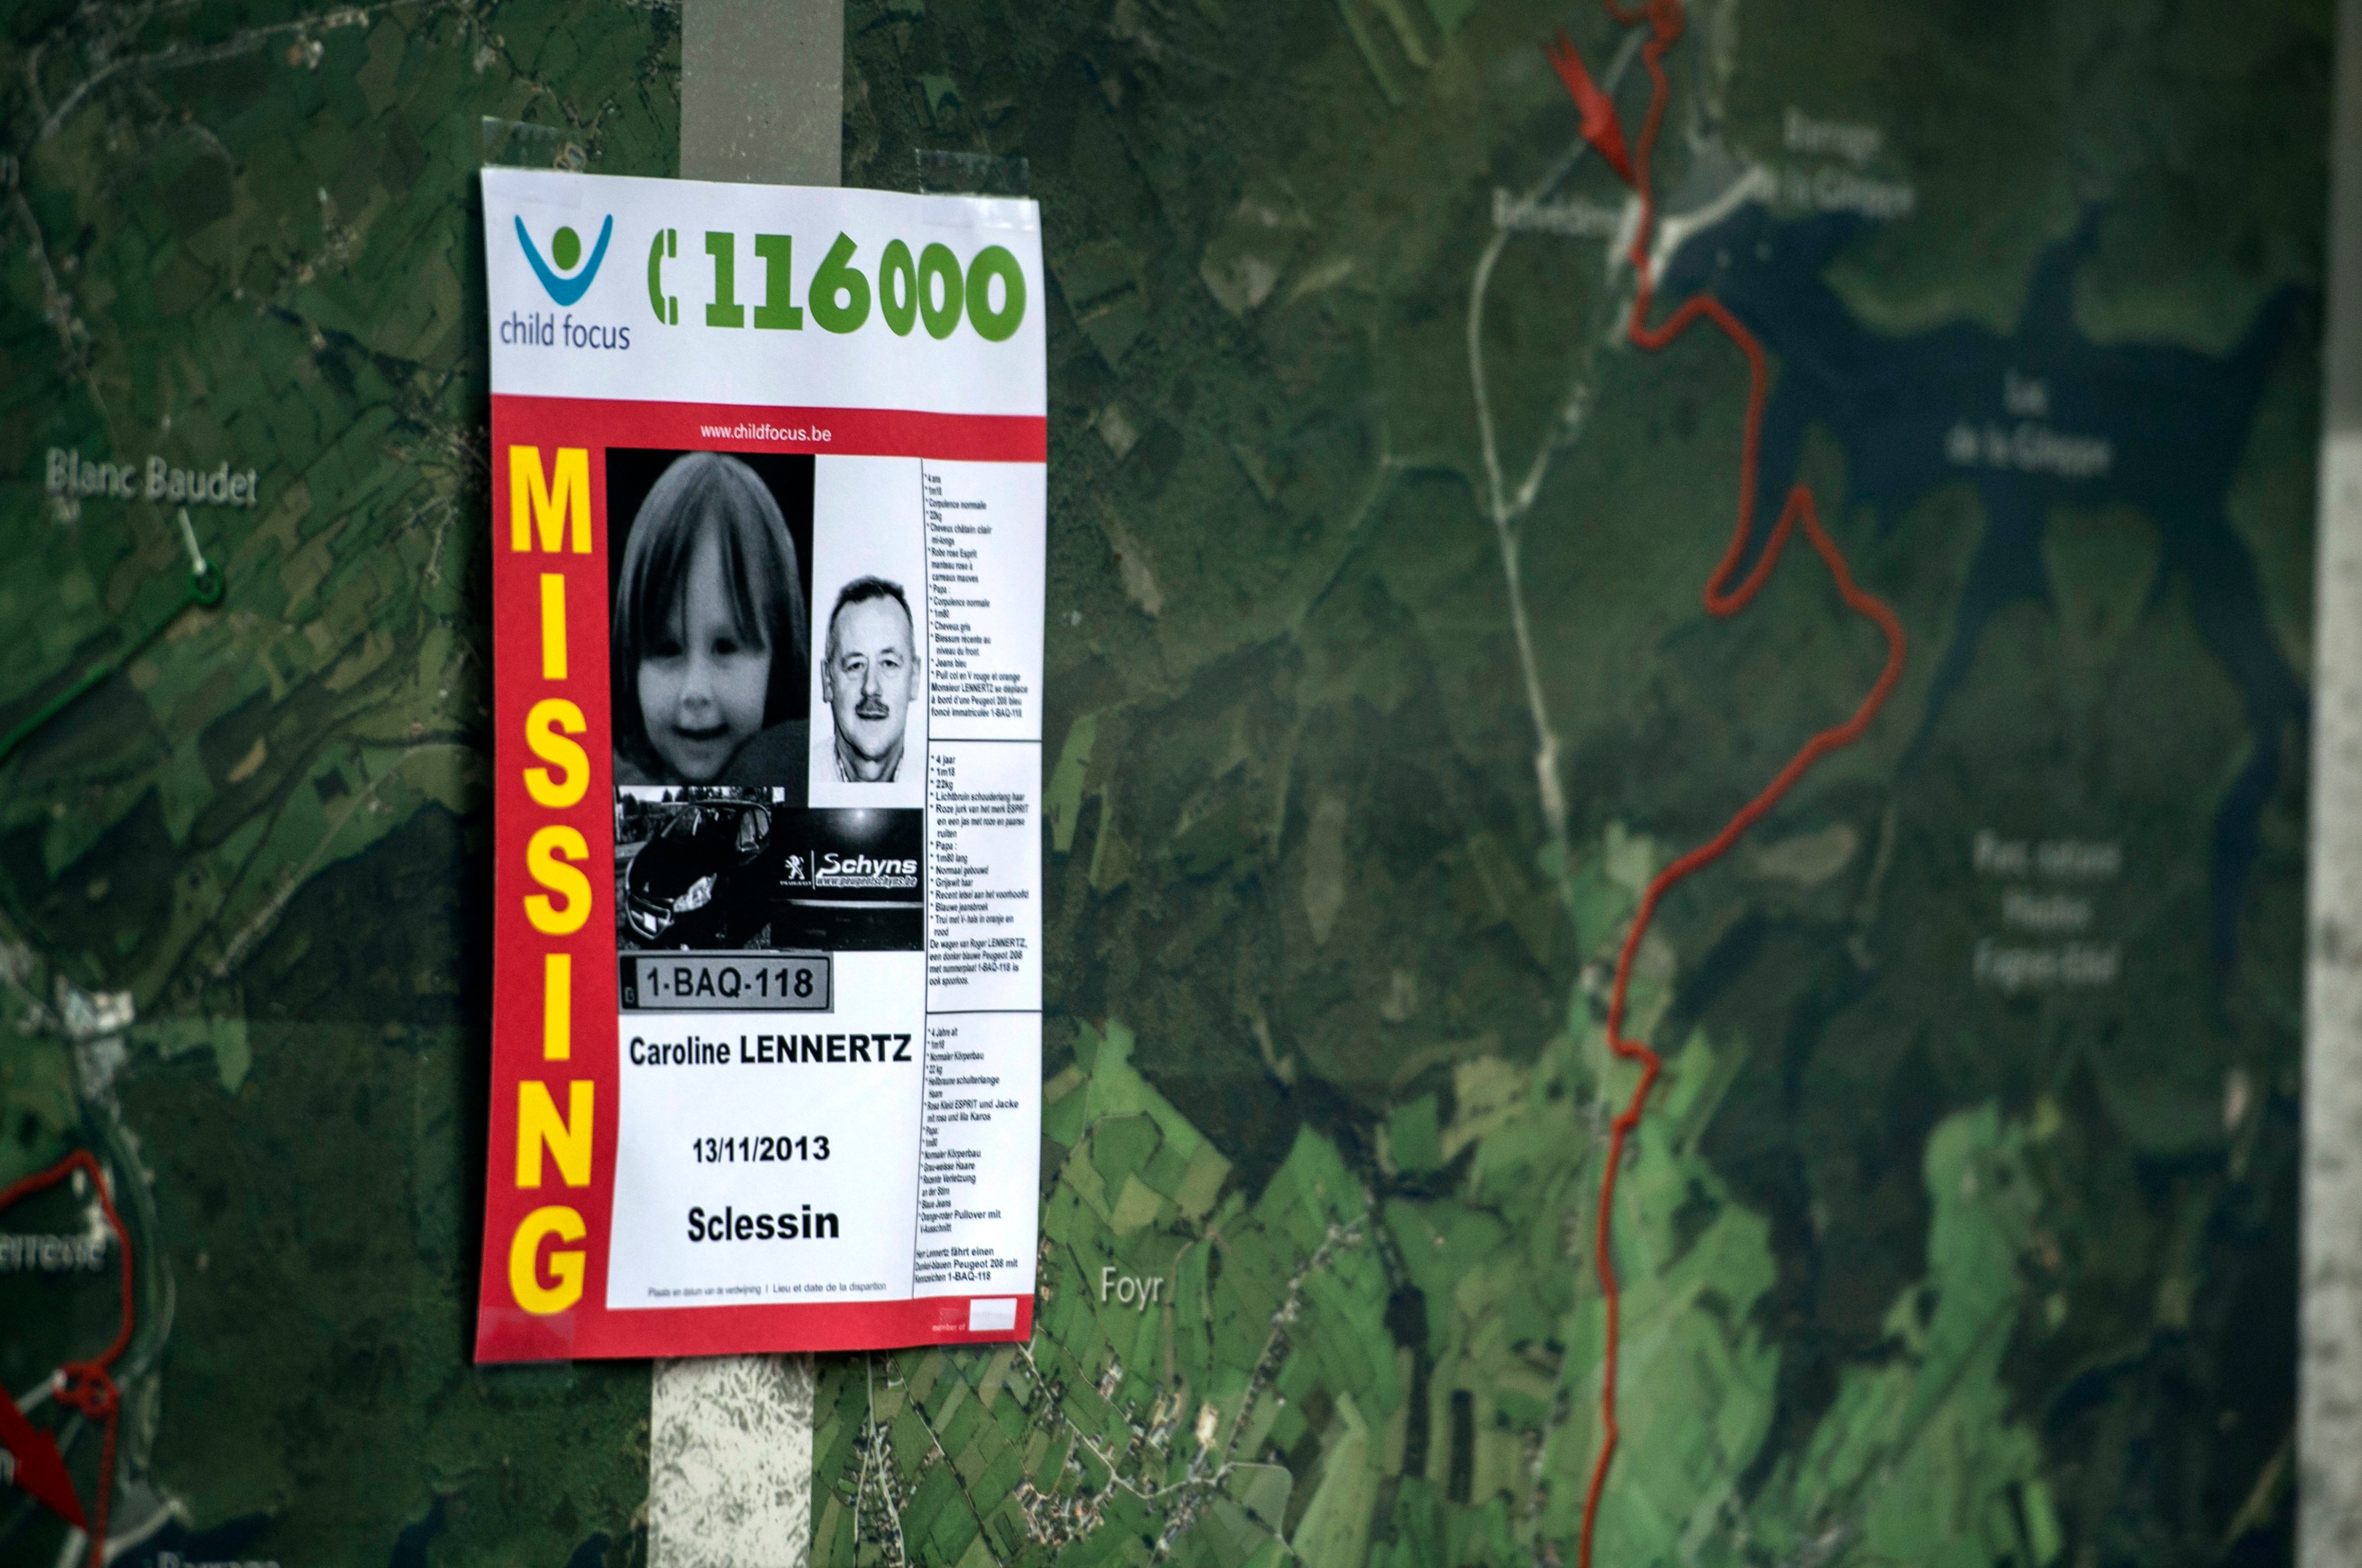 A Child Focus poster displayed during the ongoing search for a missing father and daughter in Belgium reported missing in November 2013. (AFP/Getty Images)